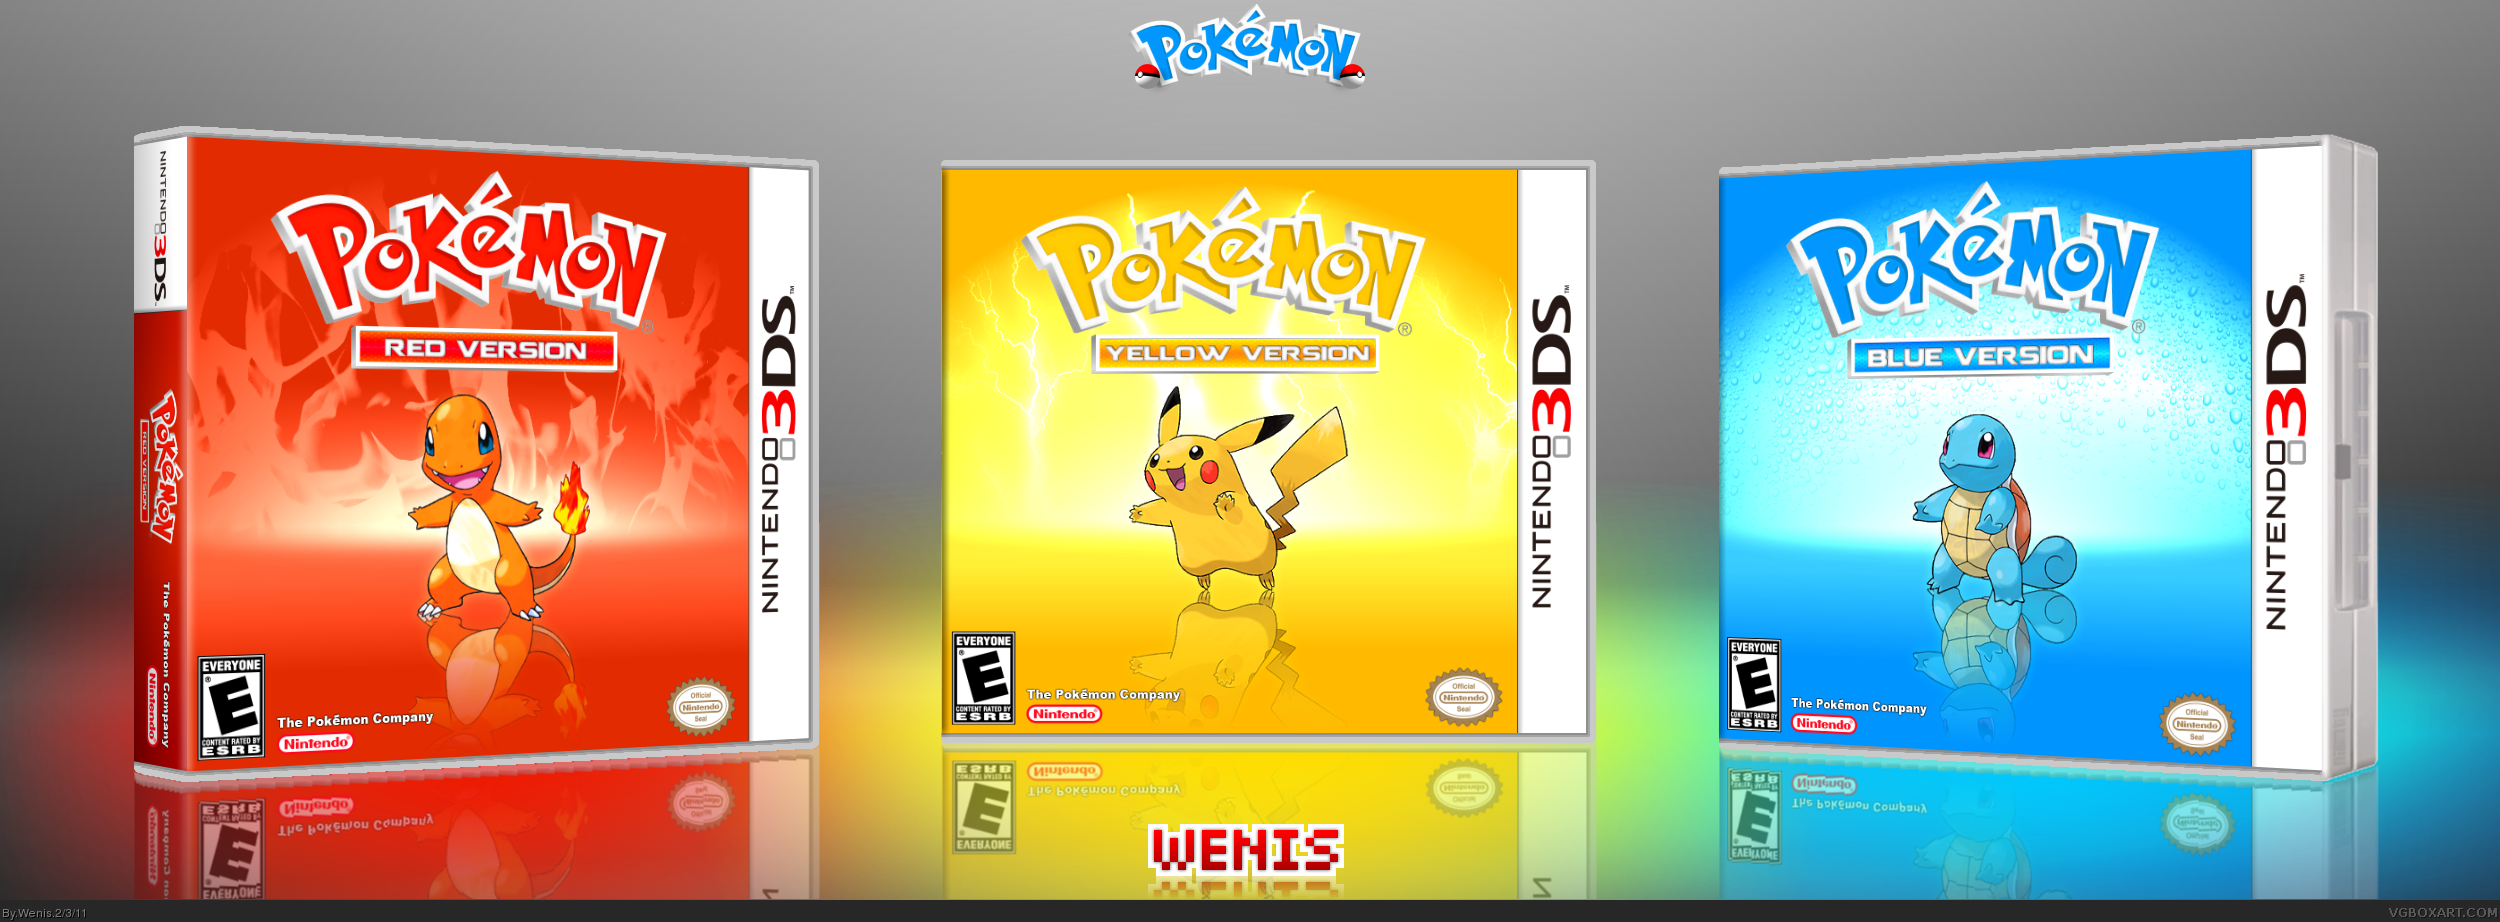 Pokemon Red, Yellow, & Blue box cover